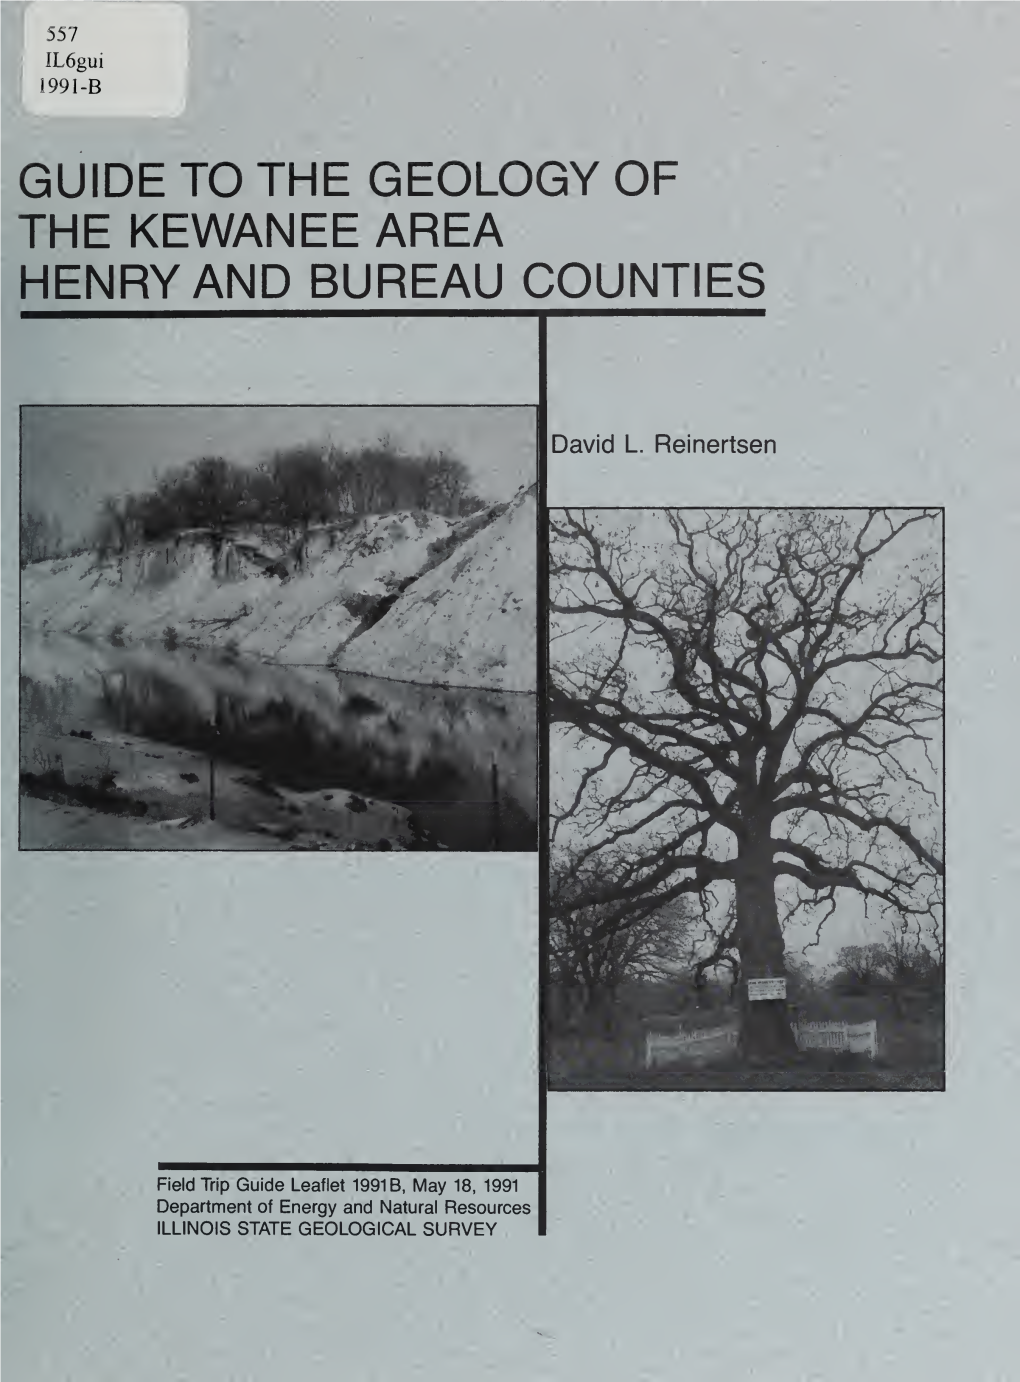 Guide to the Geology of the Kewanee Area, Henry and Bureau Counties